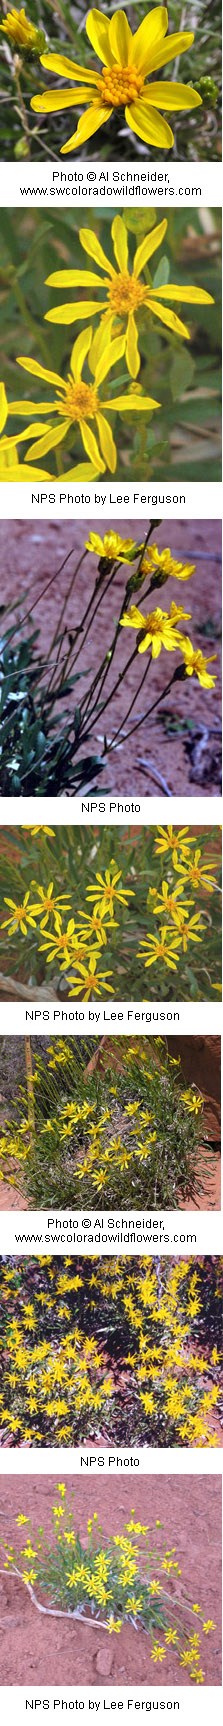 Multiple images of yellow flowers with nine petals.